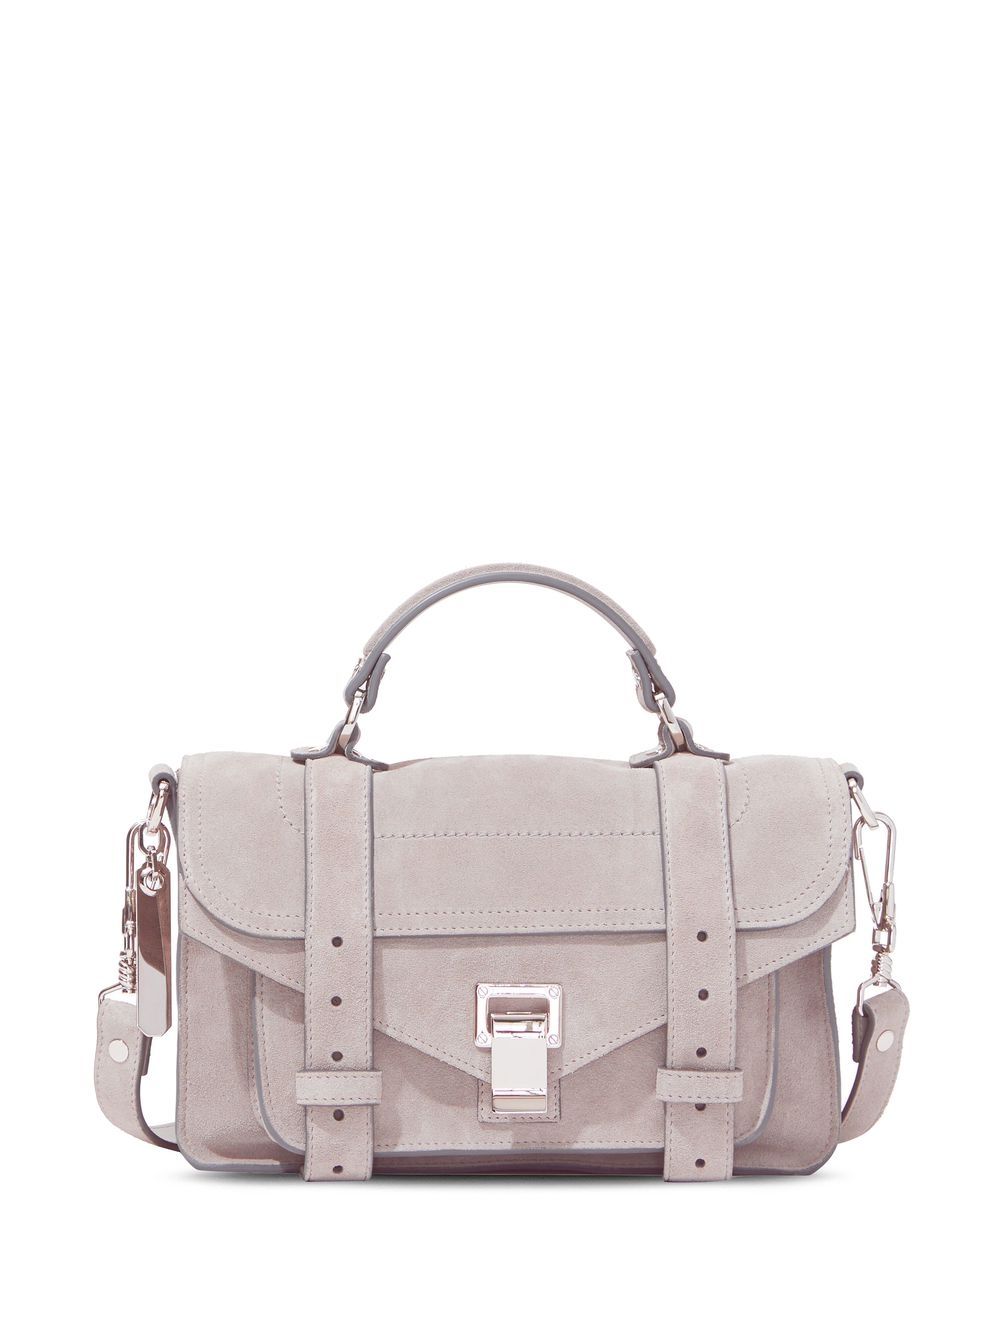 Proenza Schouler Outlet: Ps1 Tiny bag in leather - Dove Grey  Proenza  Schouler crossbody bags H00091 online at